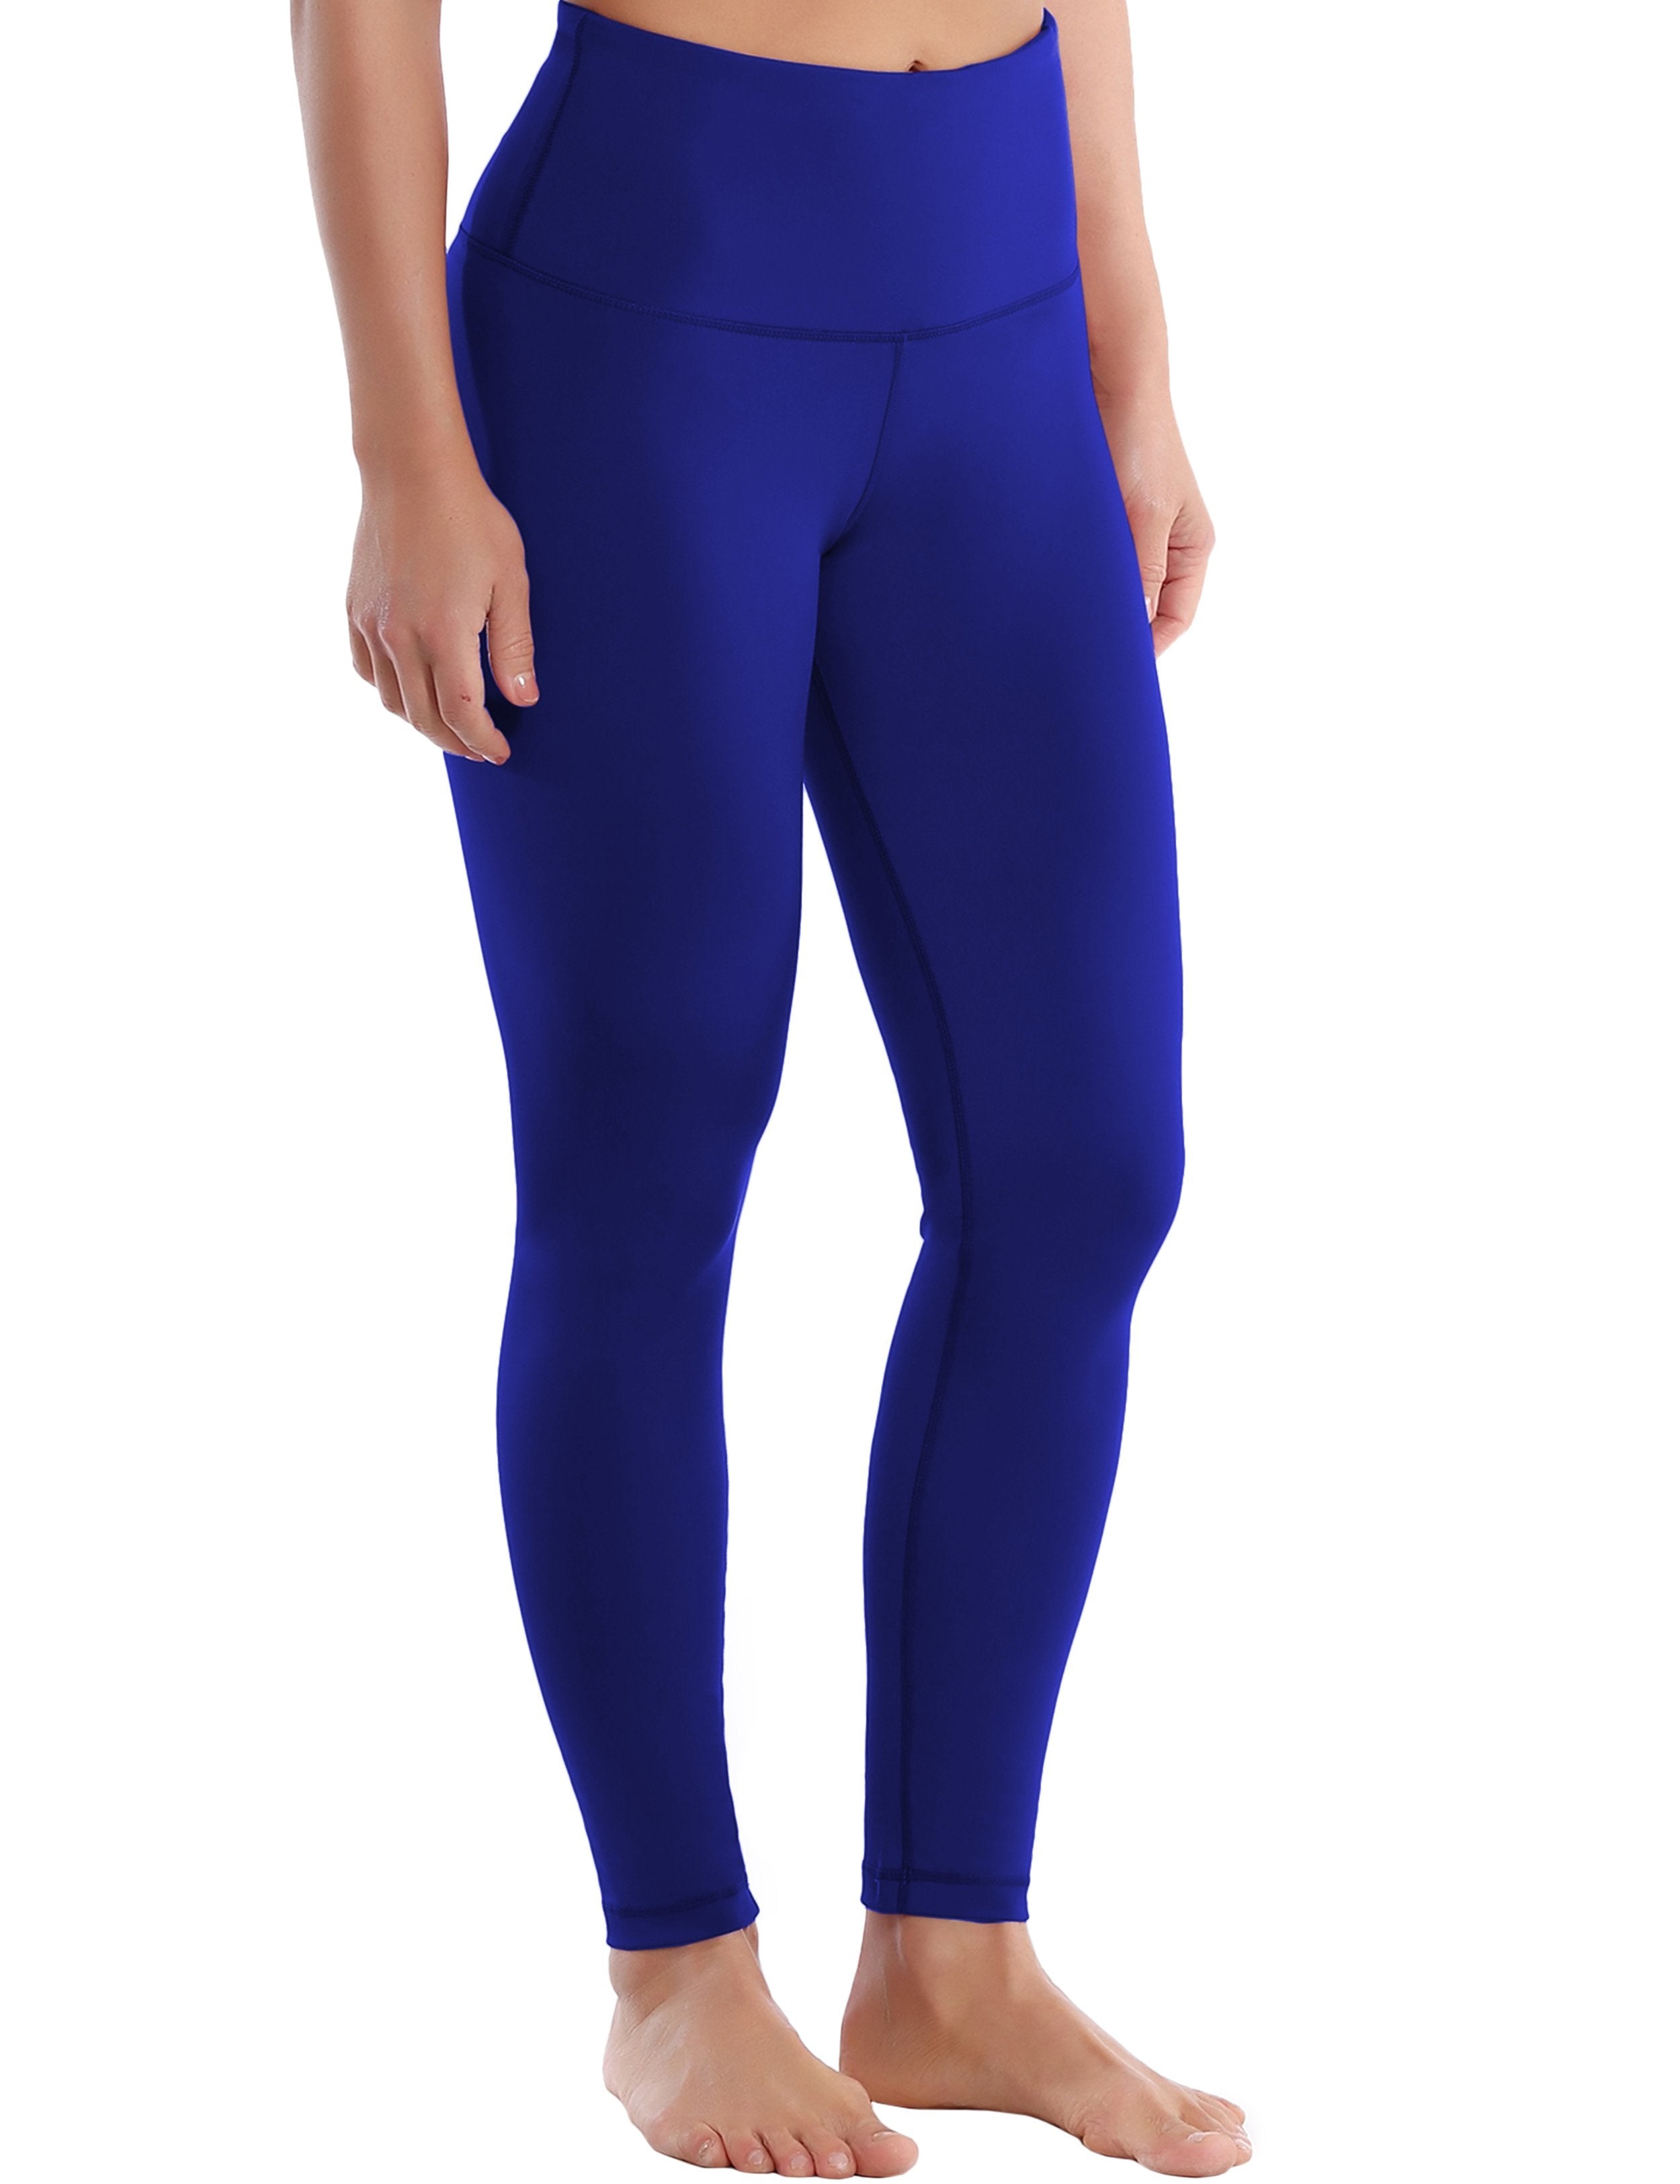 High Waist yogastudio Pants navy 75%Nylon/25%Spandex Fabric doesn't attract lint easily 4-way stretch No see-through Moisture-wicking Tummy control Inner pocket Four lengths